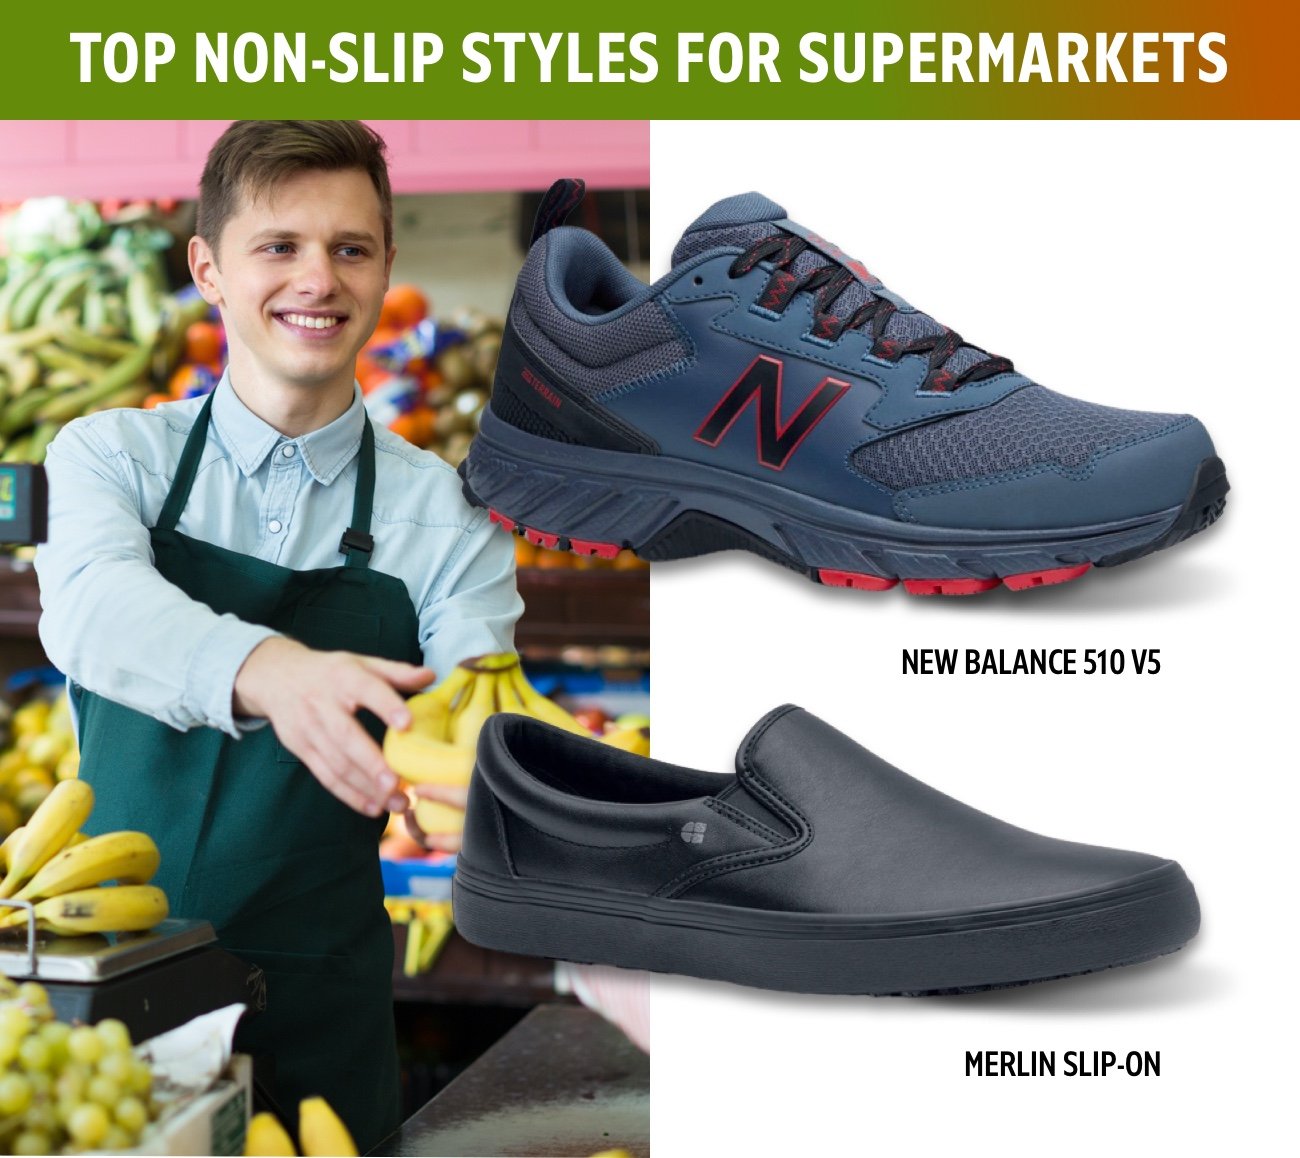 Top non-slip styles for Supermarkets